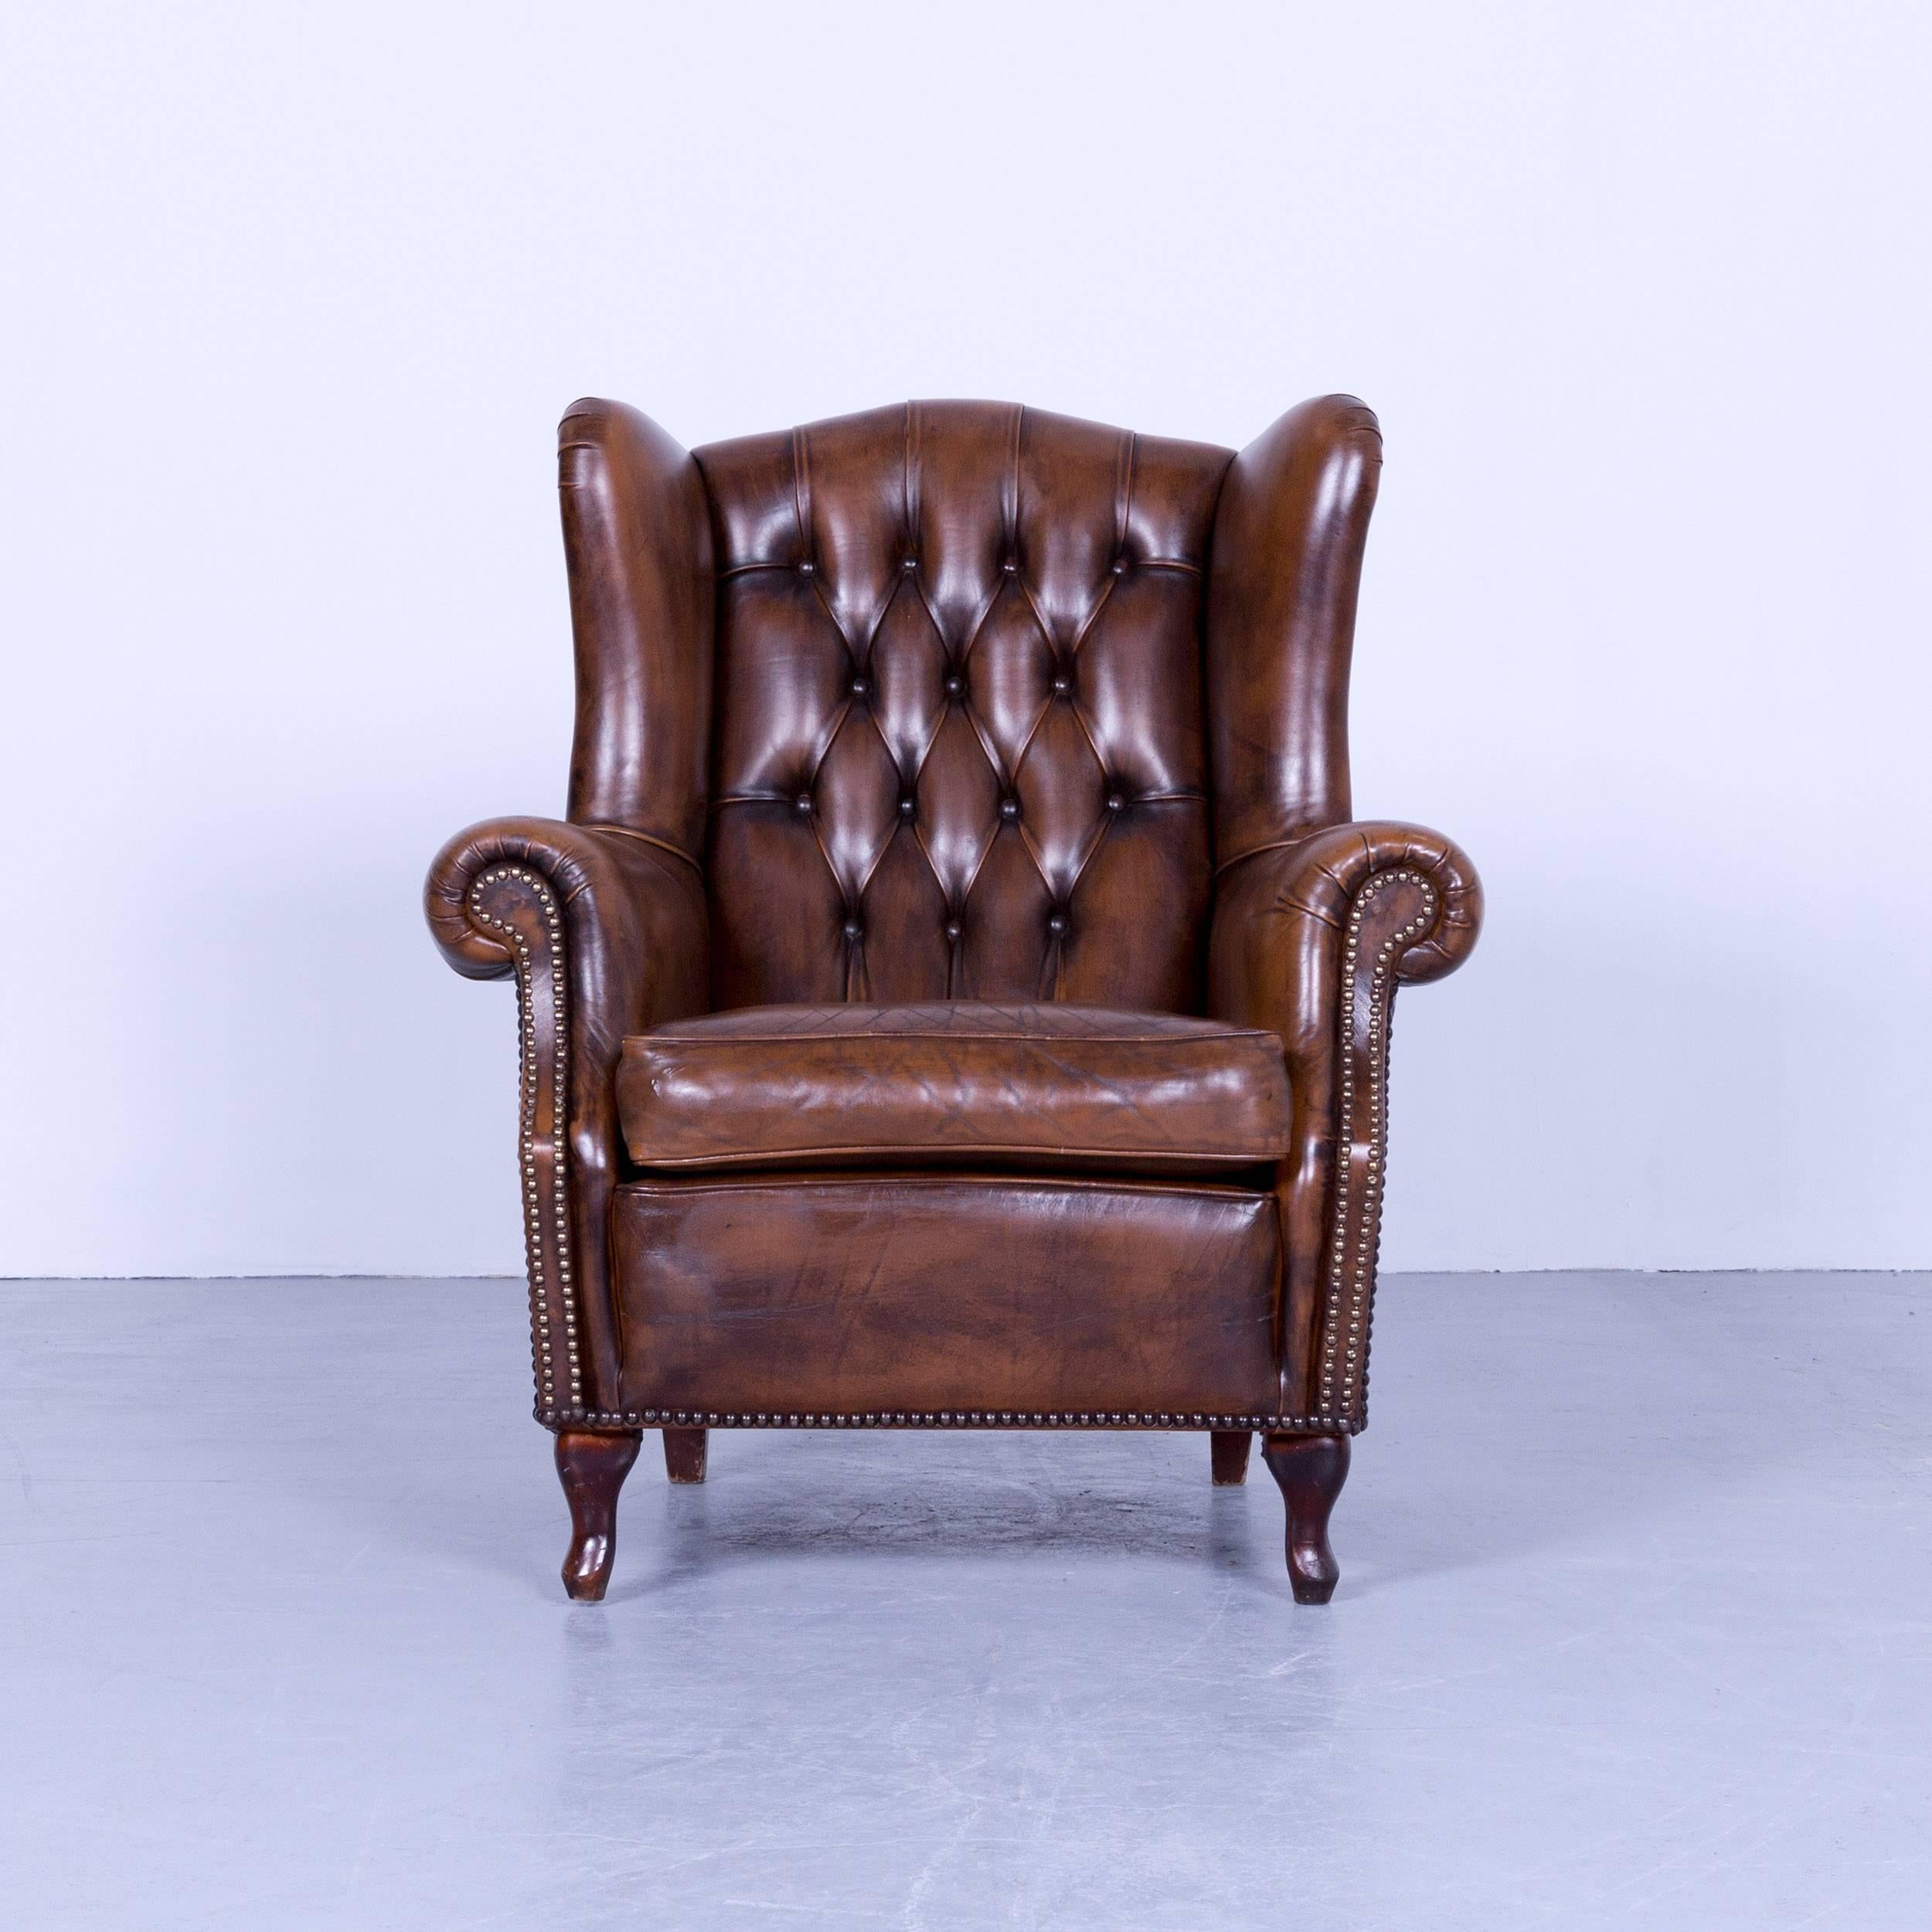 Chesterfield armchair brown cocker leather buttoned vintage retro wood handmade.